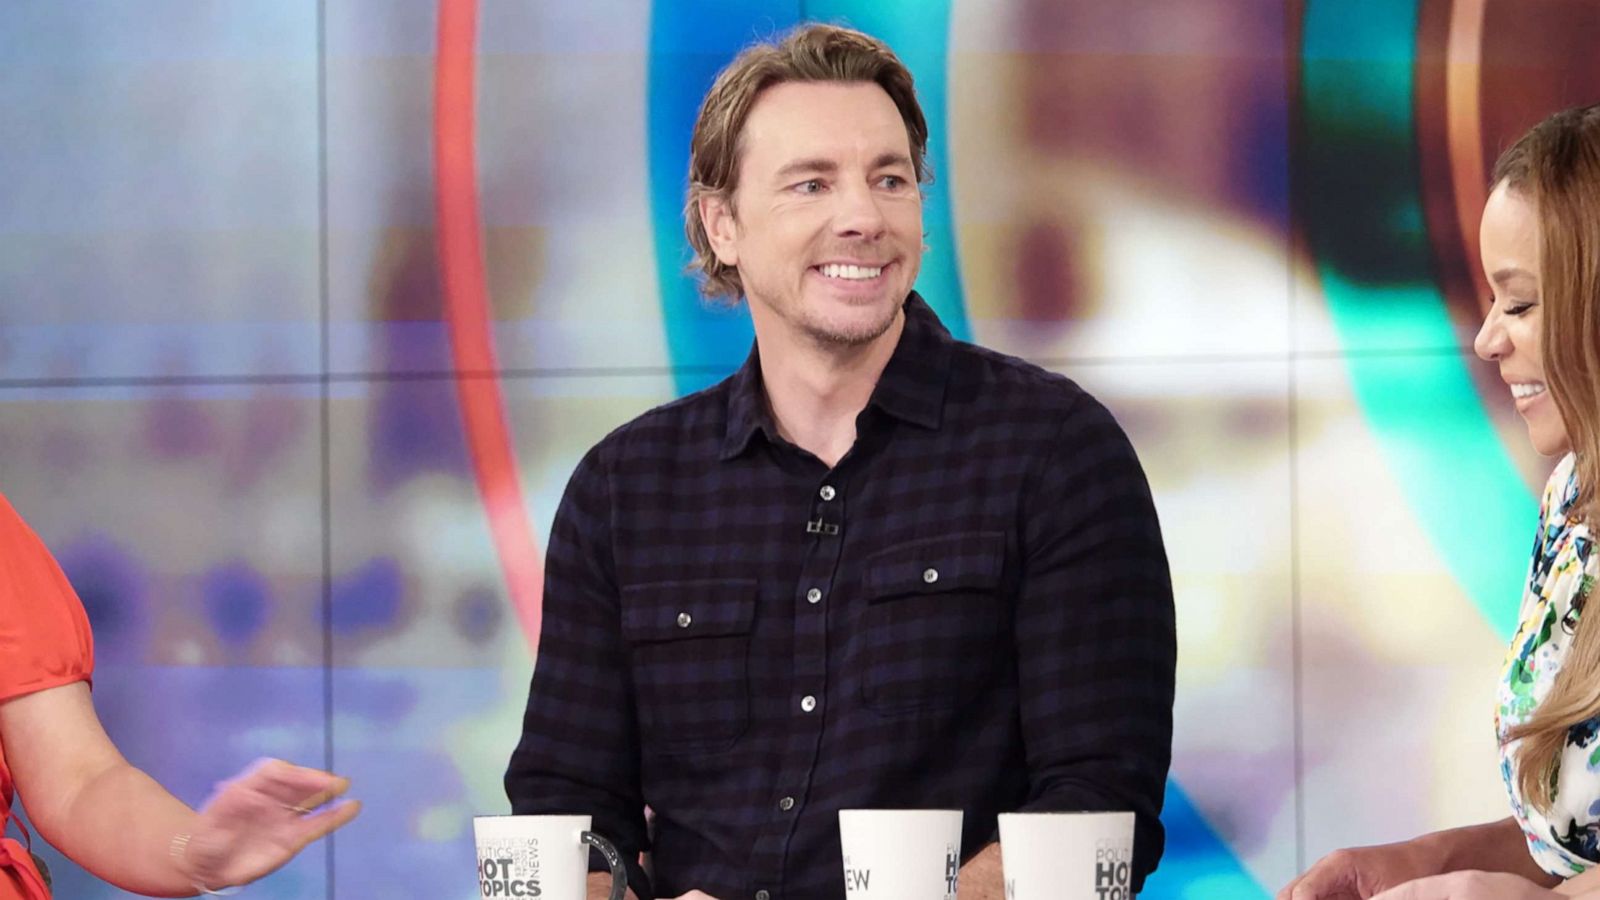 Dax Shepard Reveals How He And Wife Kristen Bell Resolve Marital Fights With Kids Present Abc News